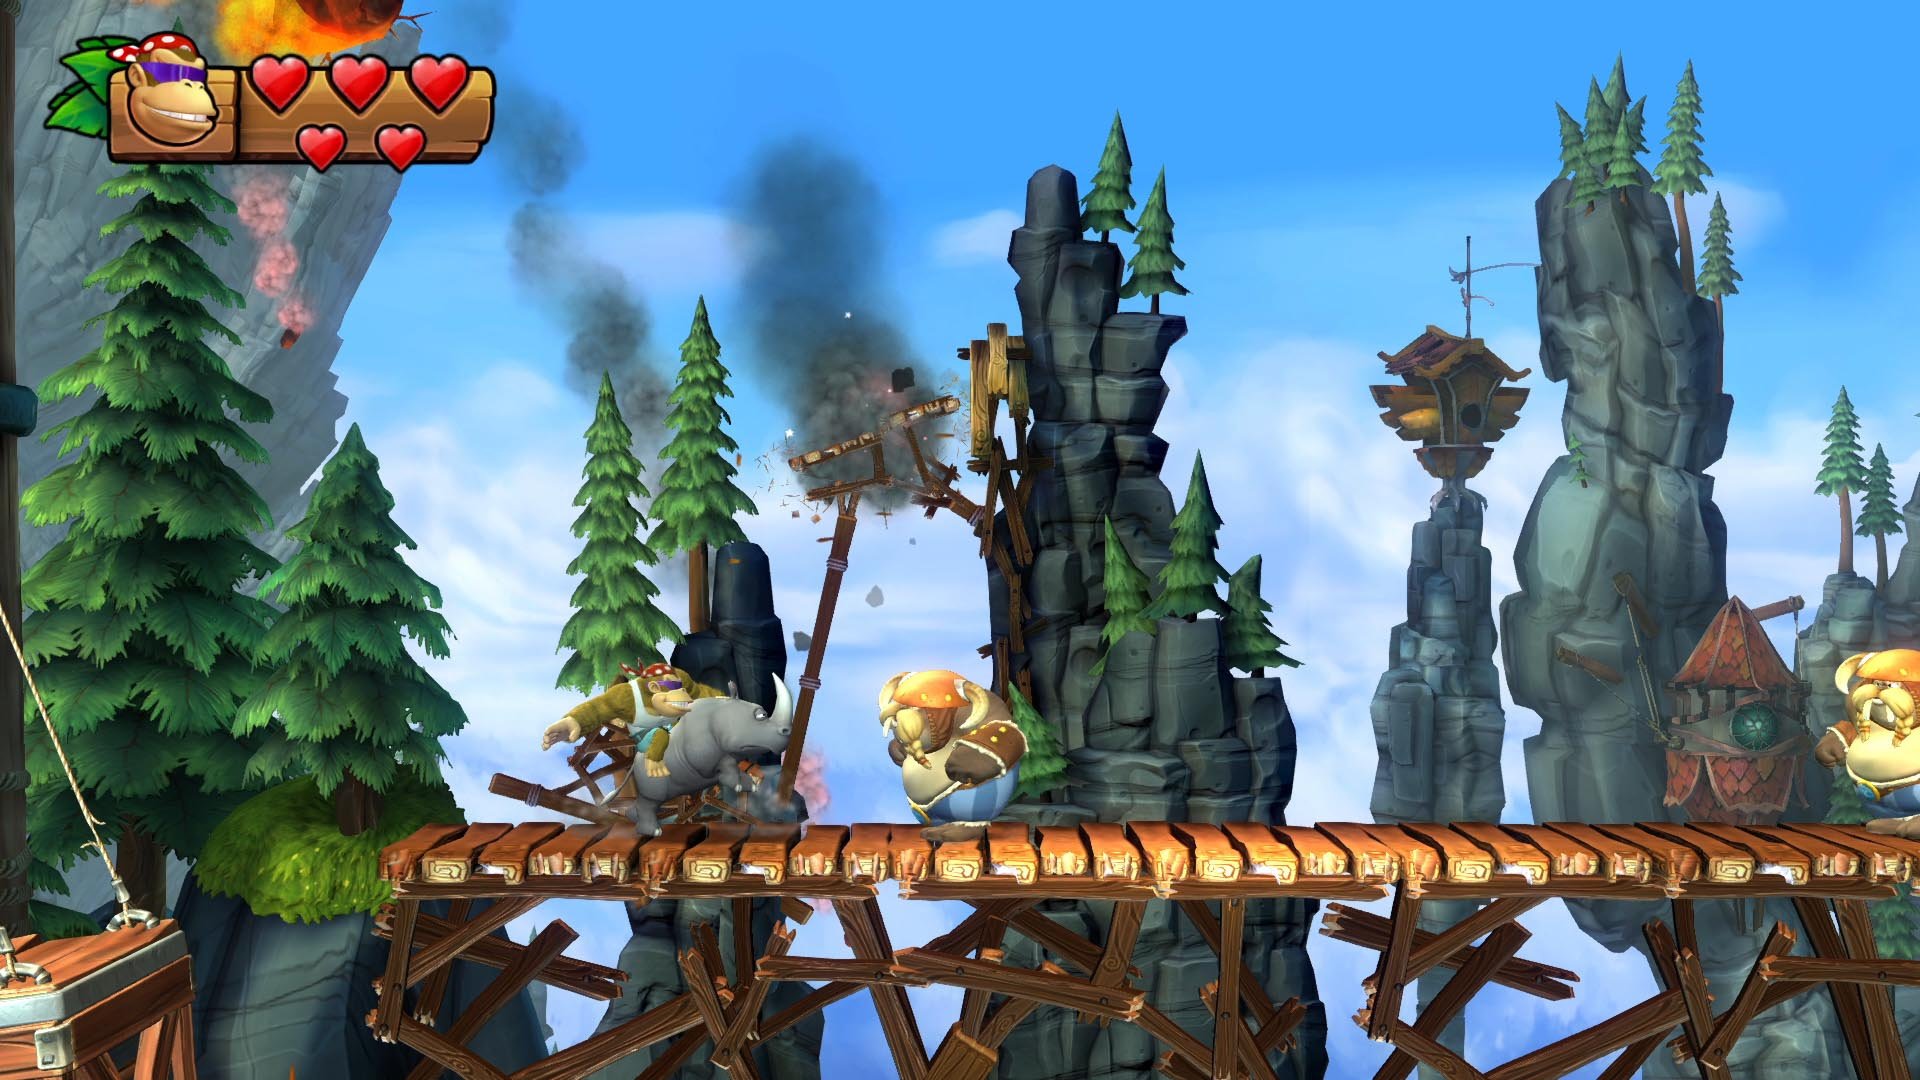 download donkey kong country tropical freeze nintendo switch